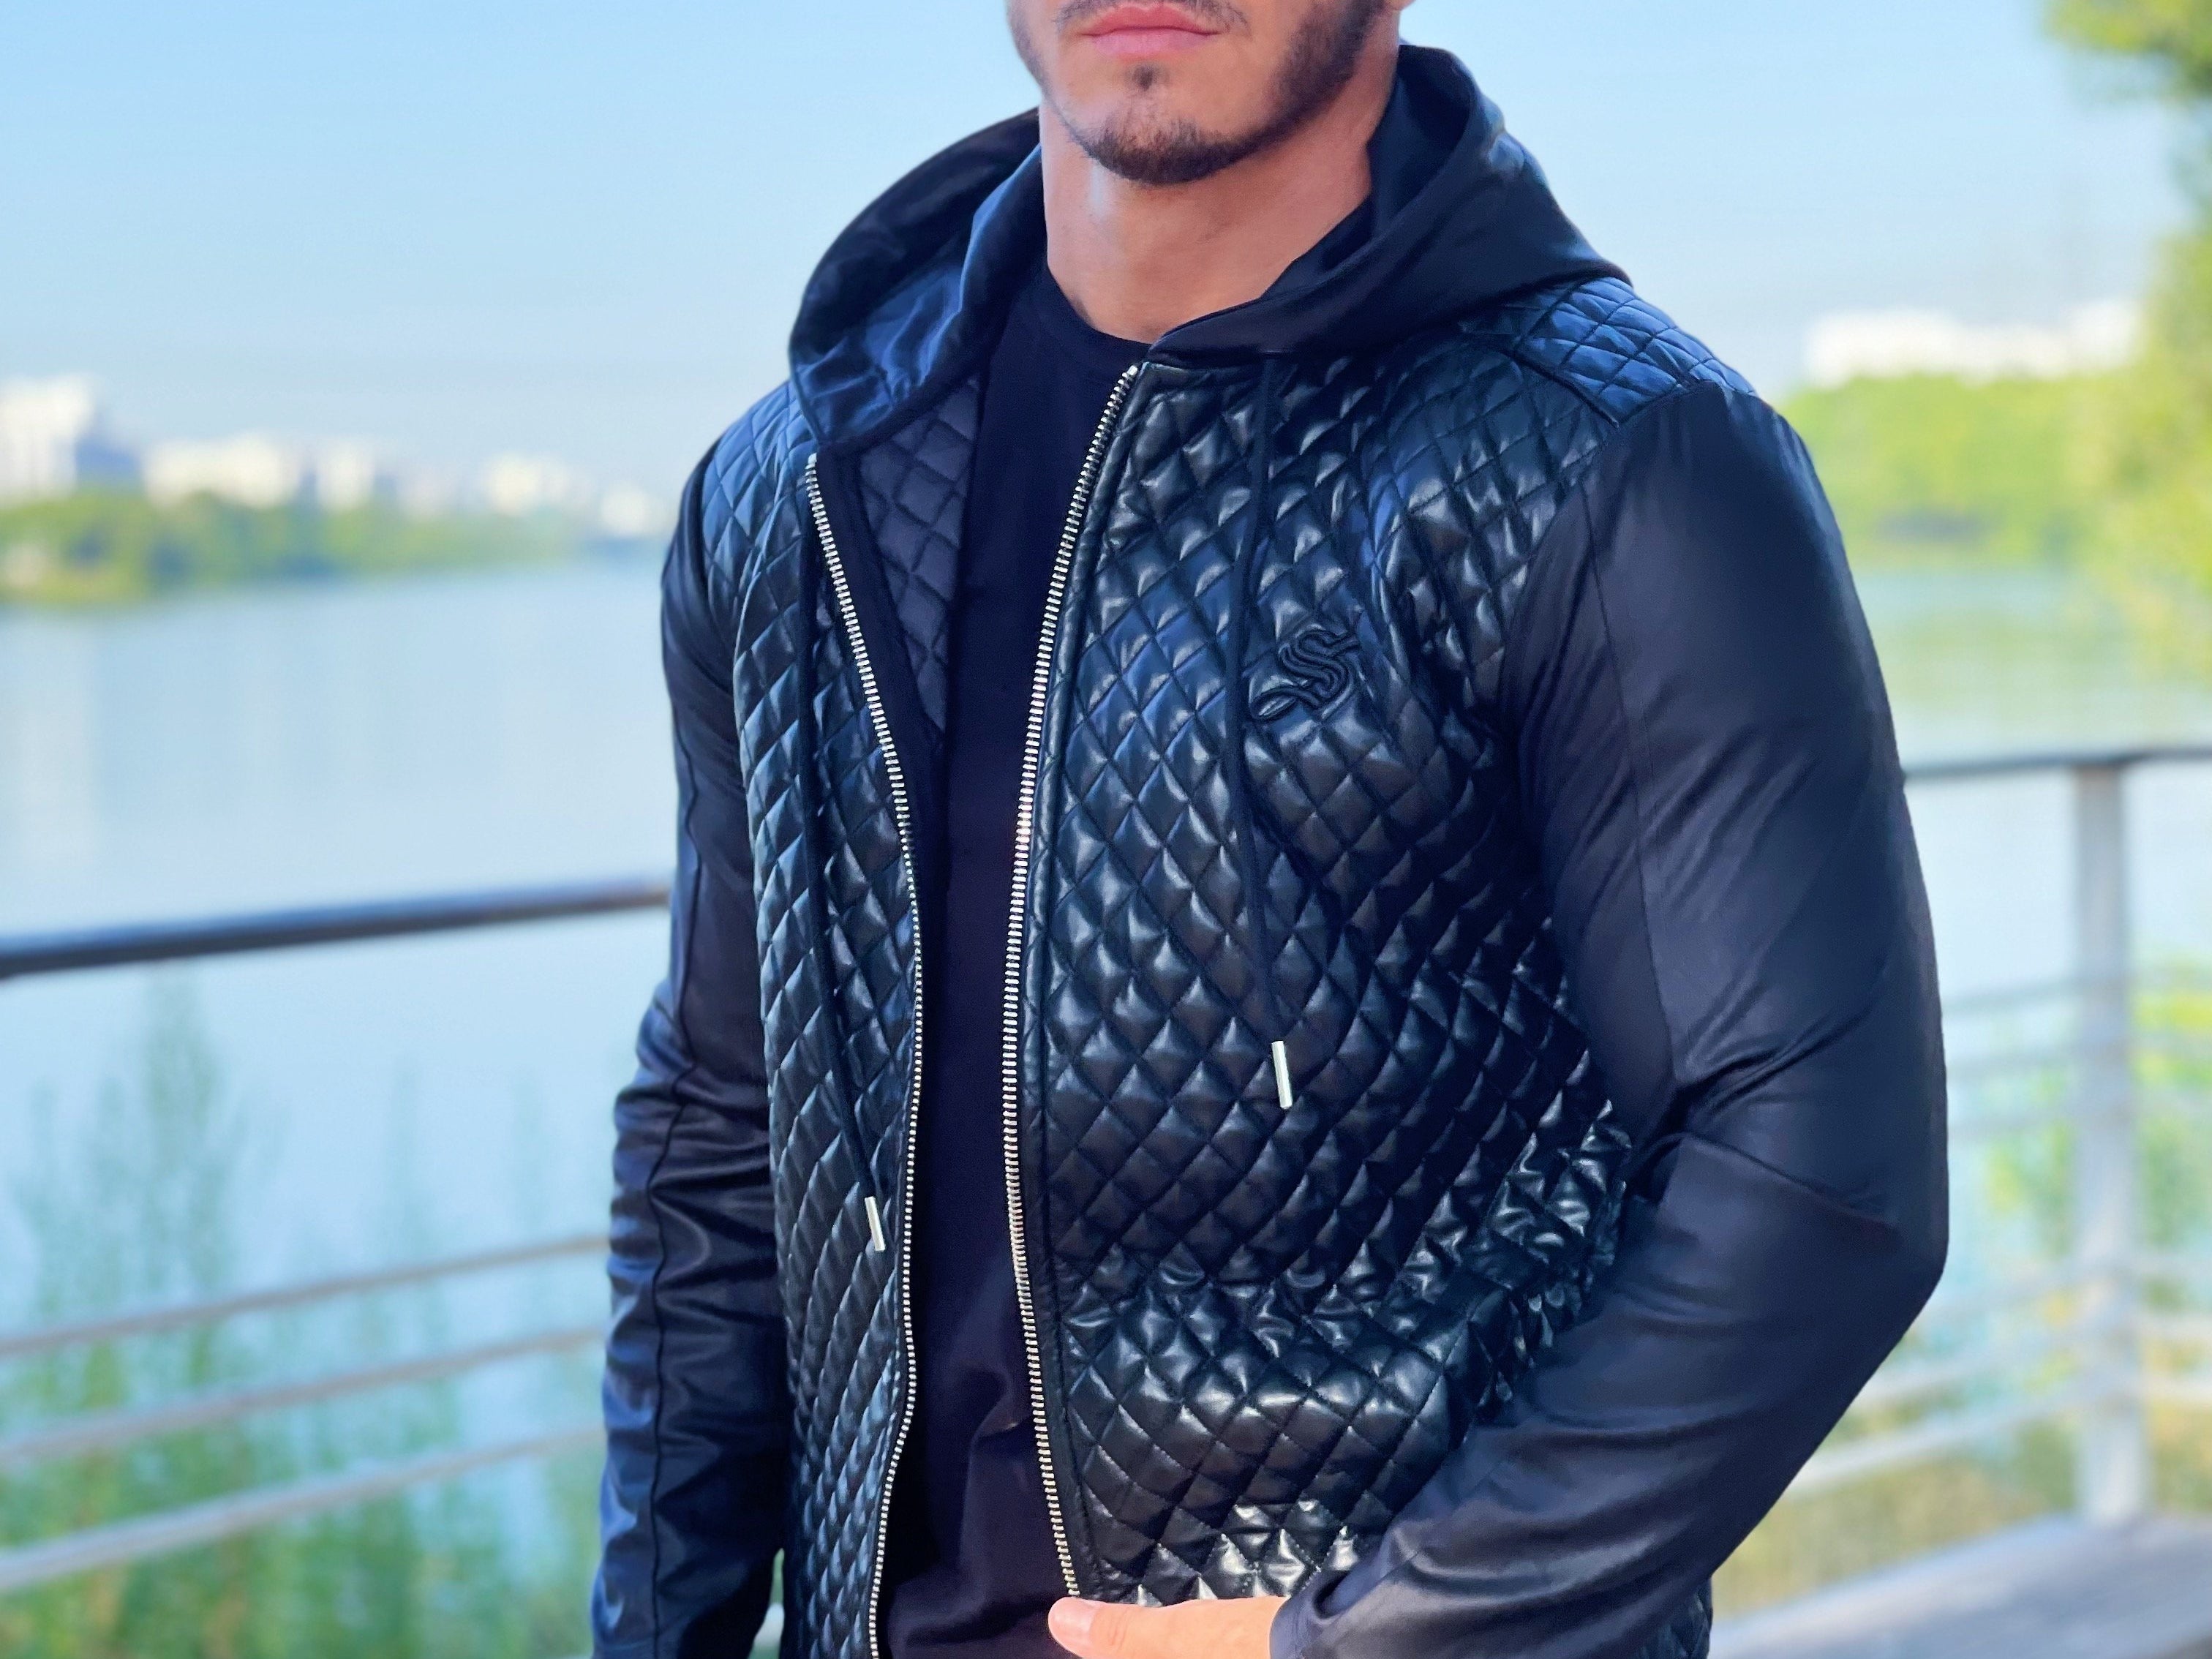 Robin - Black Jacket for Men (PRE-ORDER DISPATCH DATE 1 JULY 2022) - Sarman Fashion - Wholesale Clothing Fashion Brand for Men from Canada